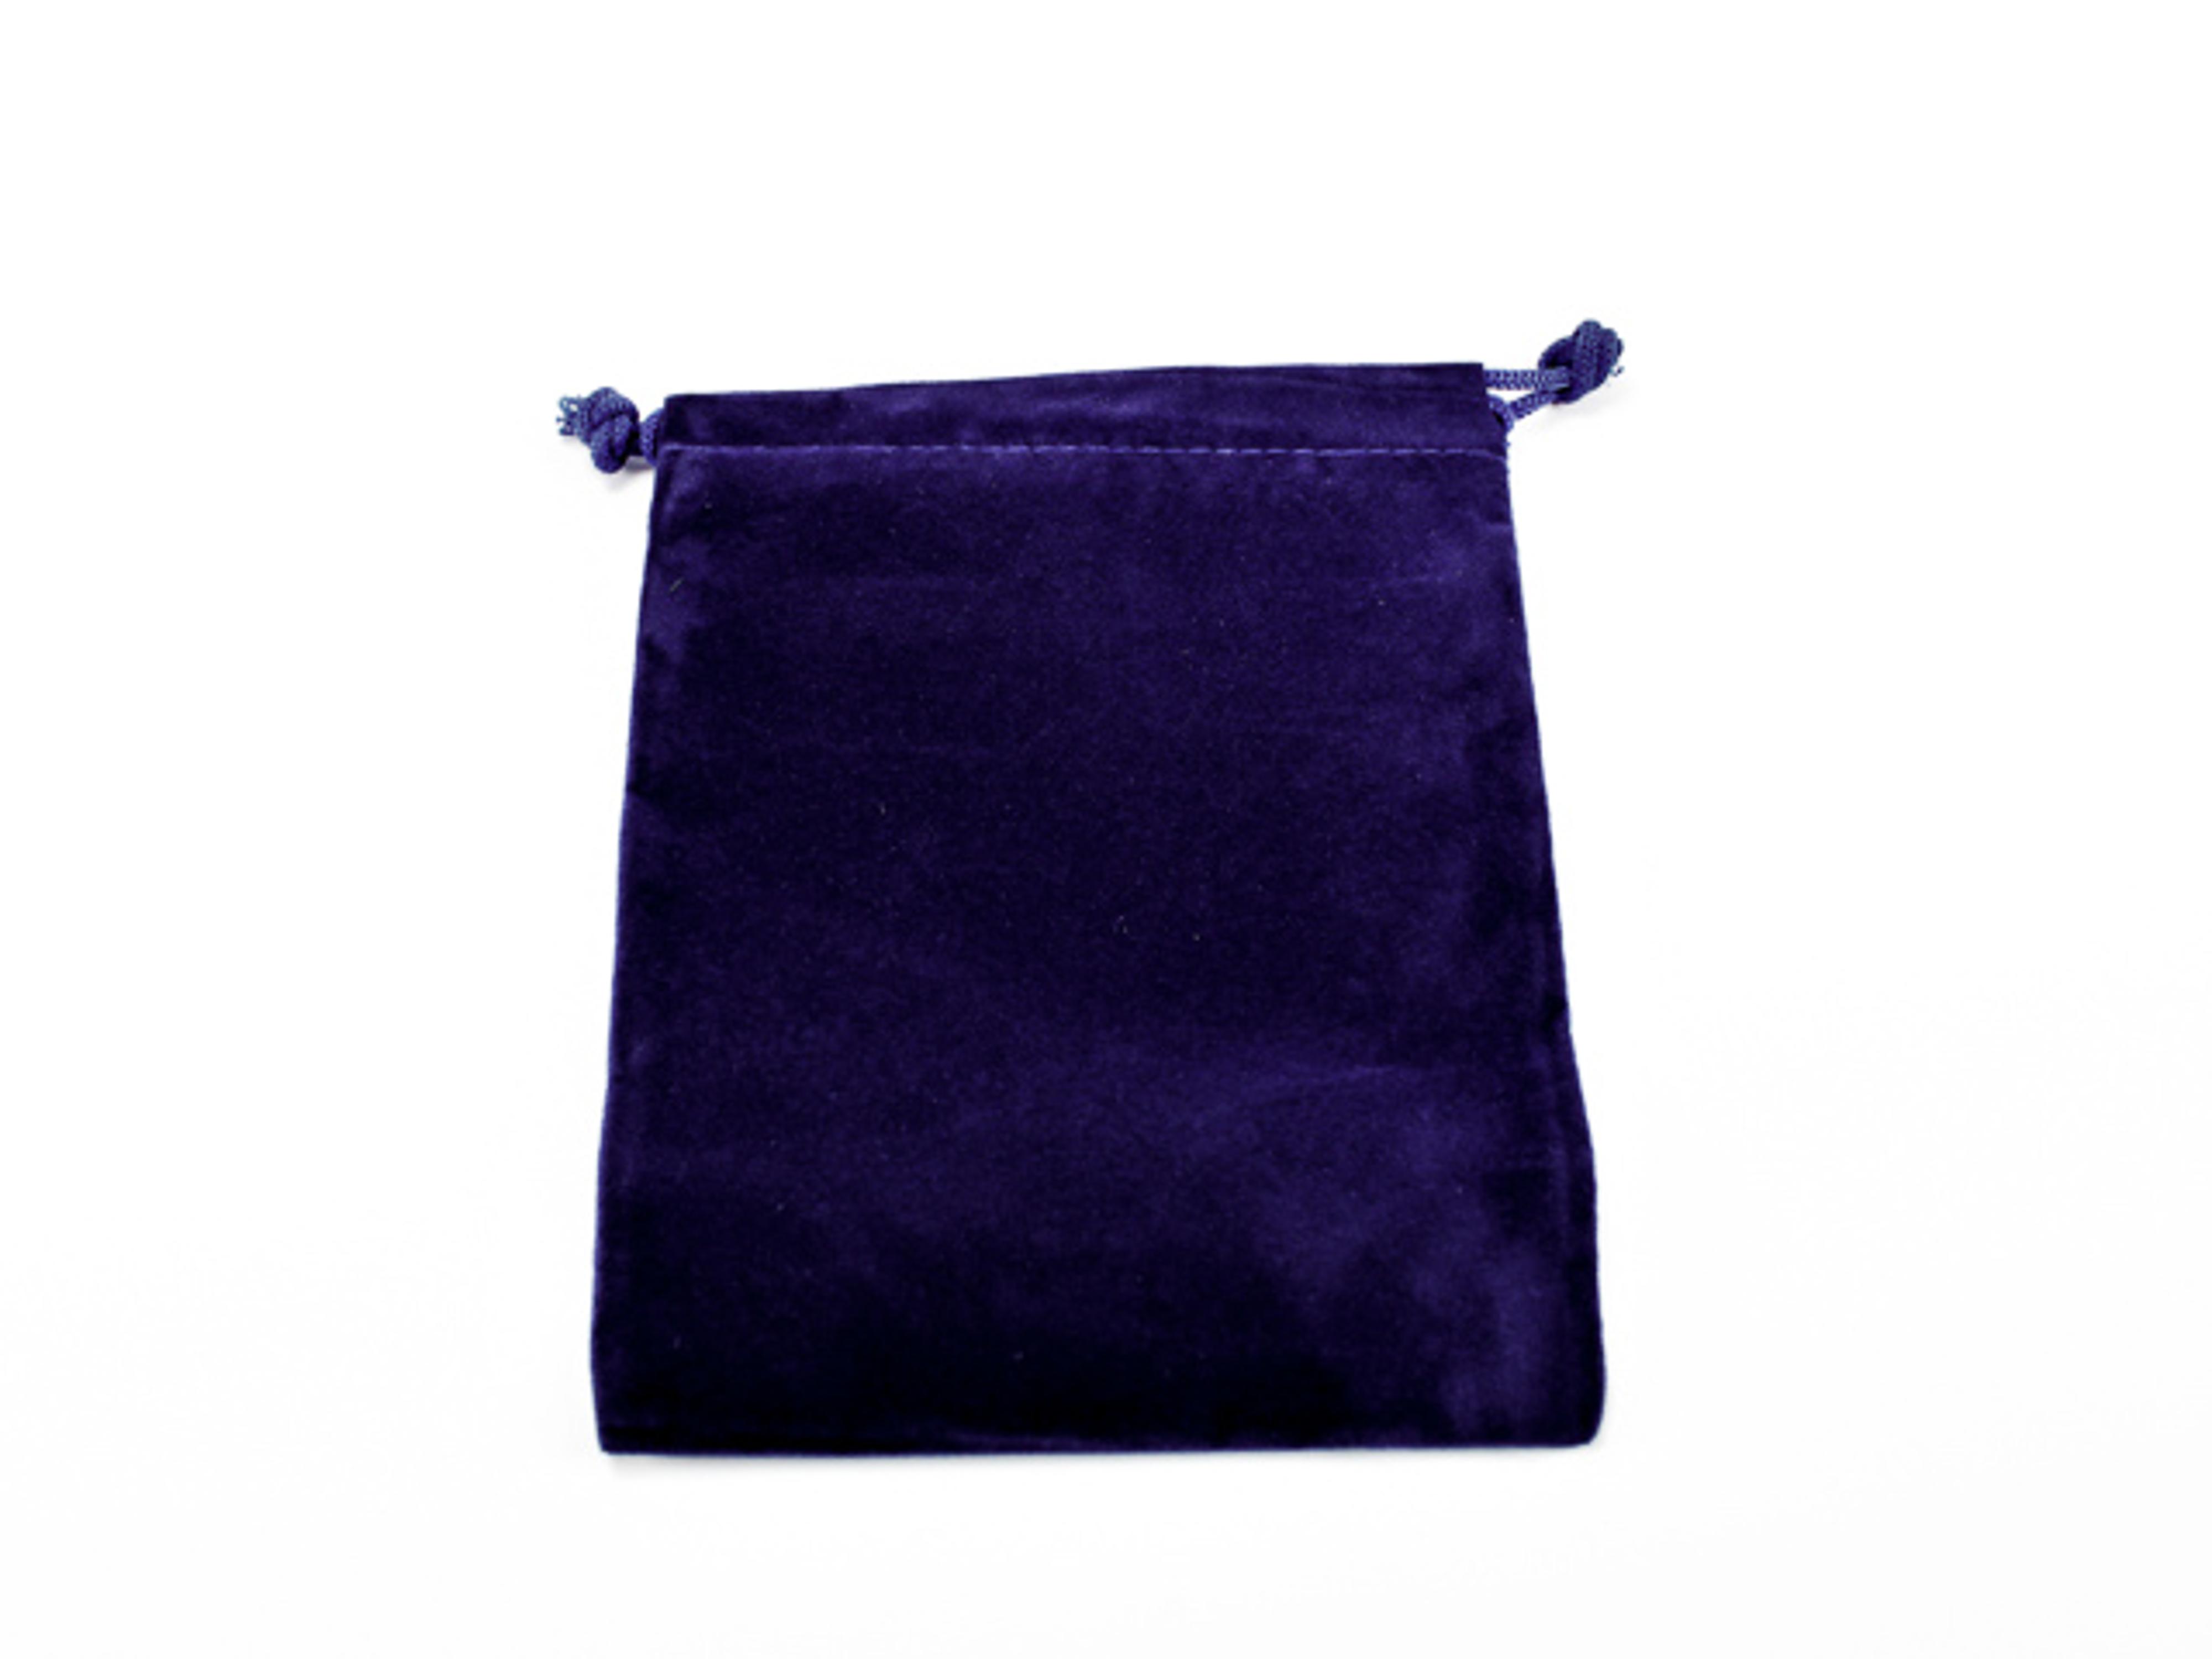 Chessex Dice Bag (Small, Royal Blue)